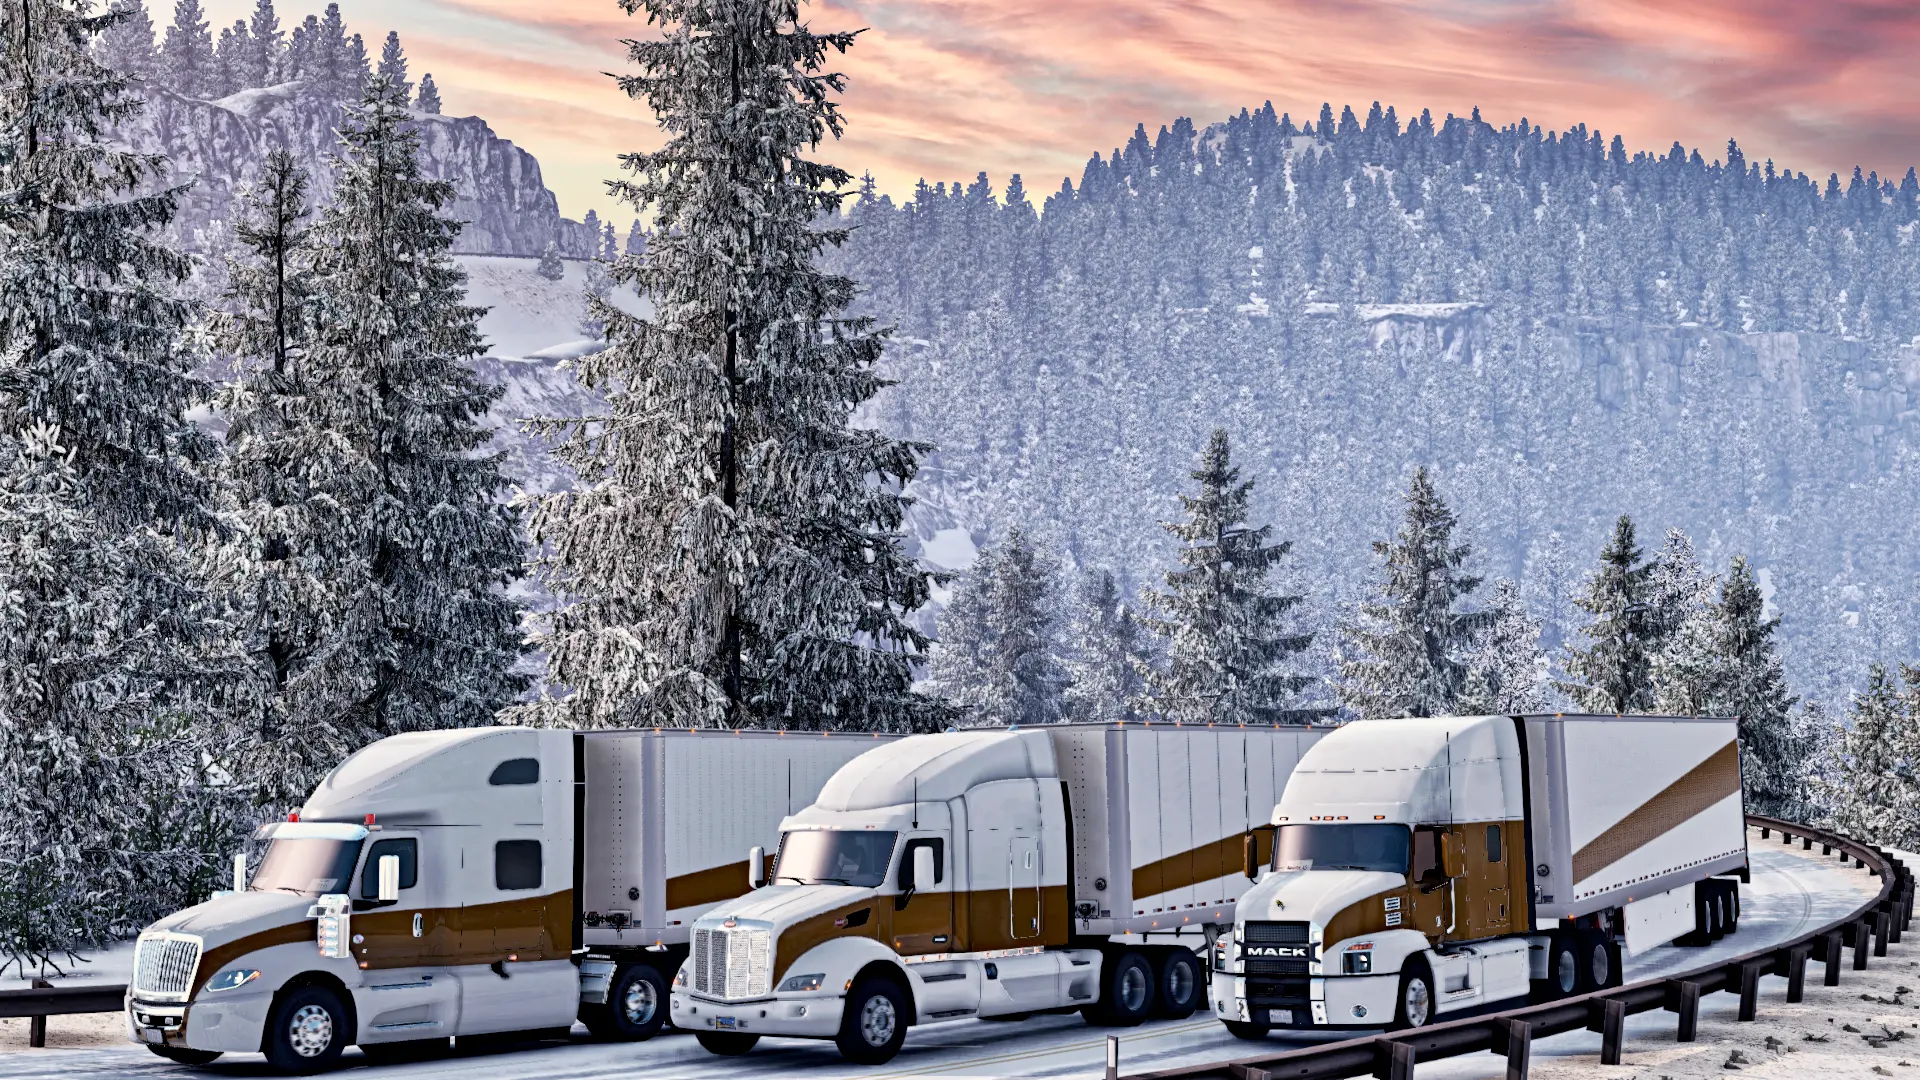 Three American GPE trucks going around a bend in the road, all trucks are wearing the new gold and white paint job. the landscape is covered in snow